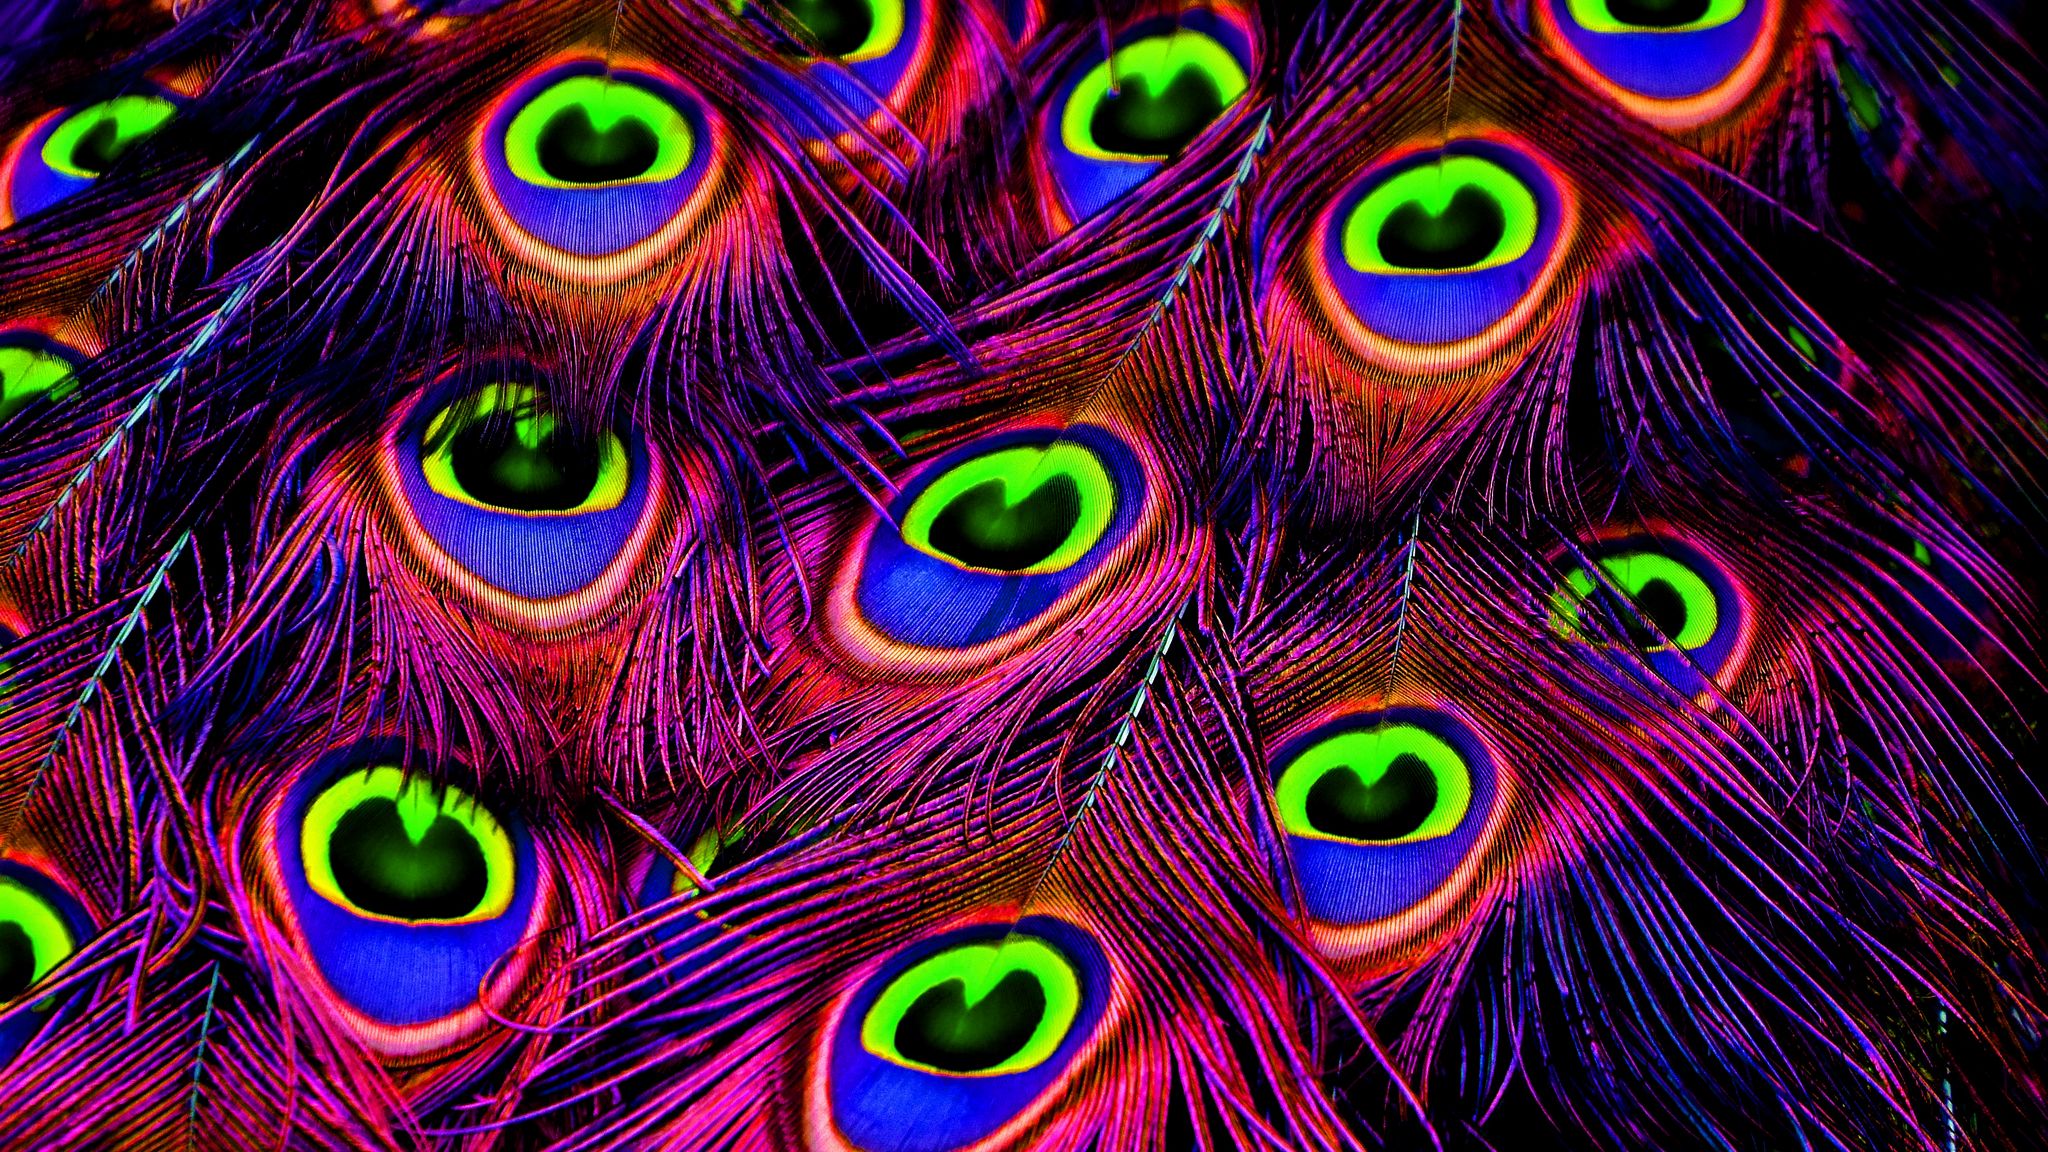 Download wallpaper 2048x1152 peacock, feathers, bright, photohop ultrawide monitor HD background